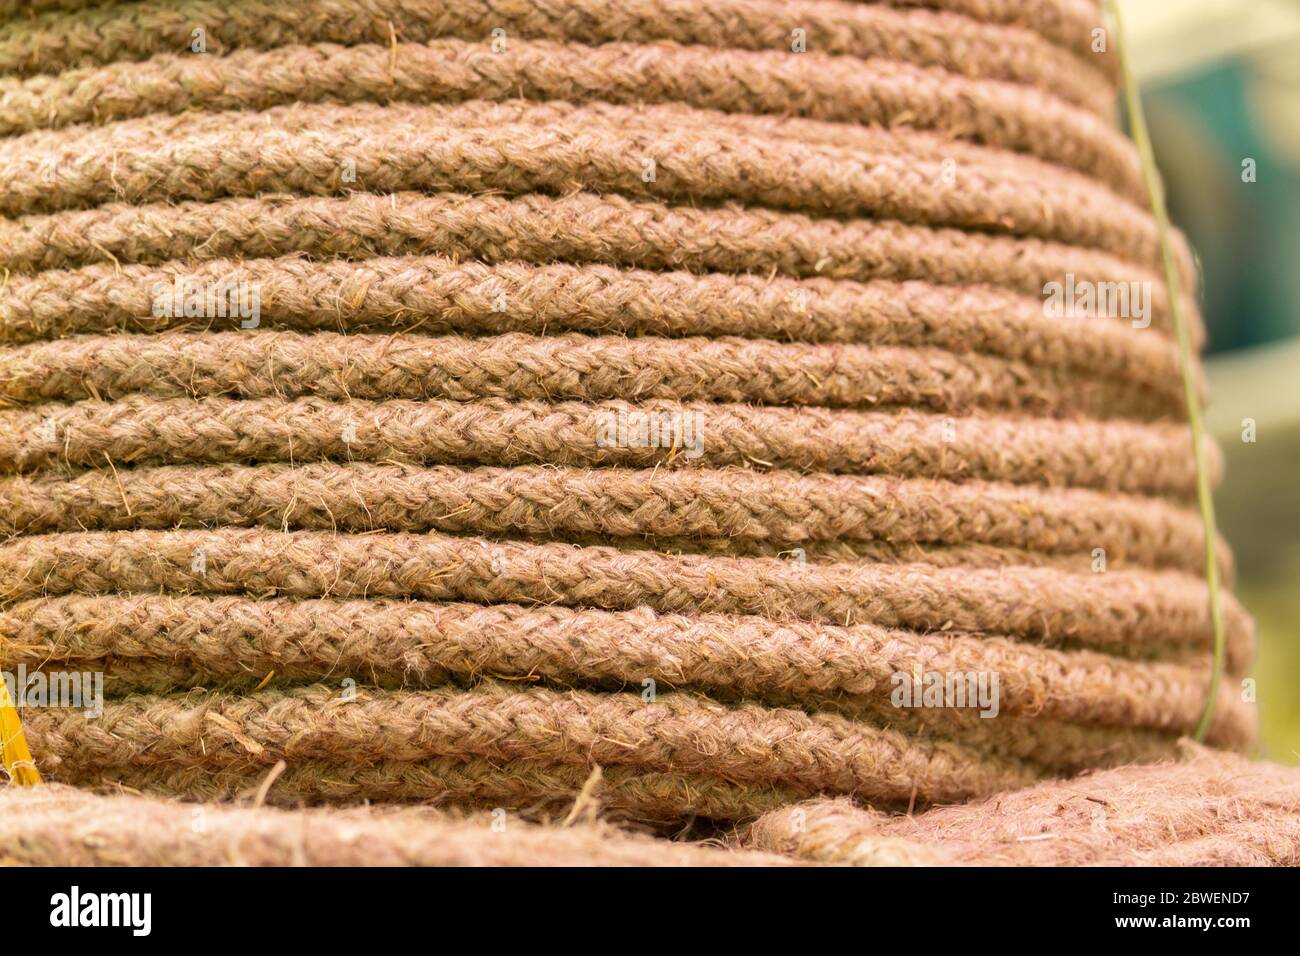 Natural jute rope, vegetable fiber woven into a thick thread close-up  textured effect. Natural plant material. Hemp or linen rope. Backdrop  texture ba Stock Photo - Alamy, Thick Thread 